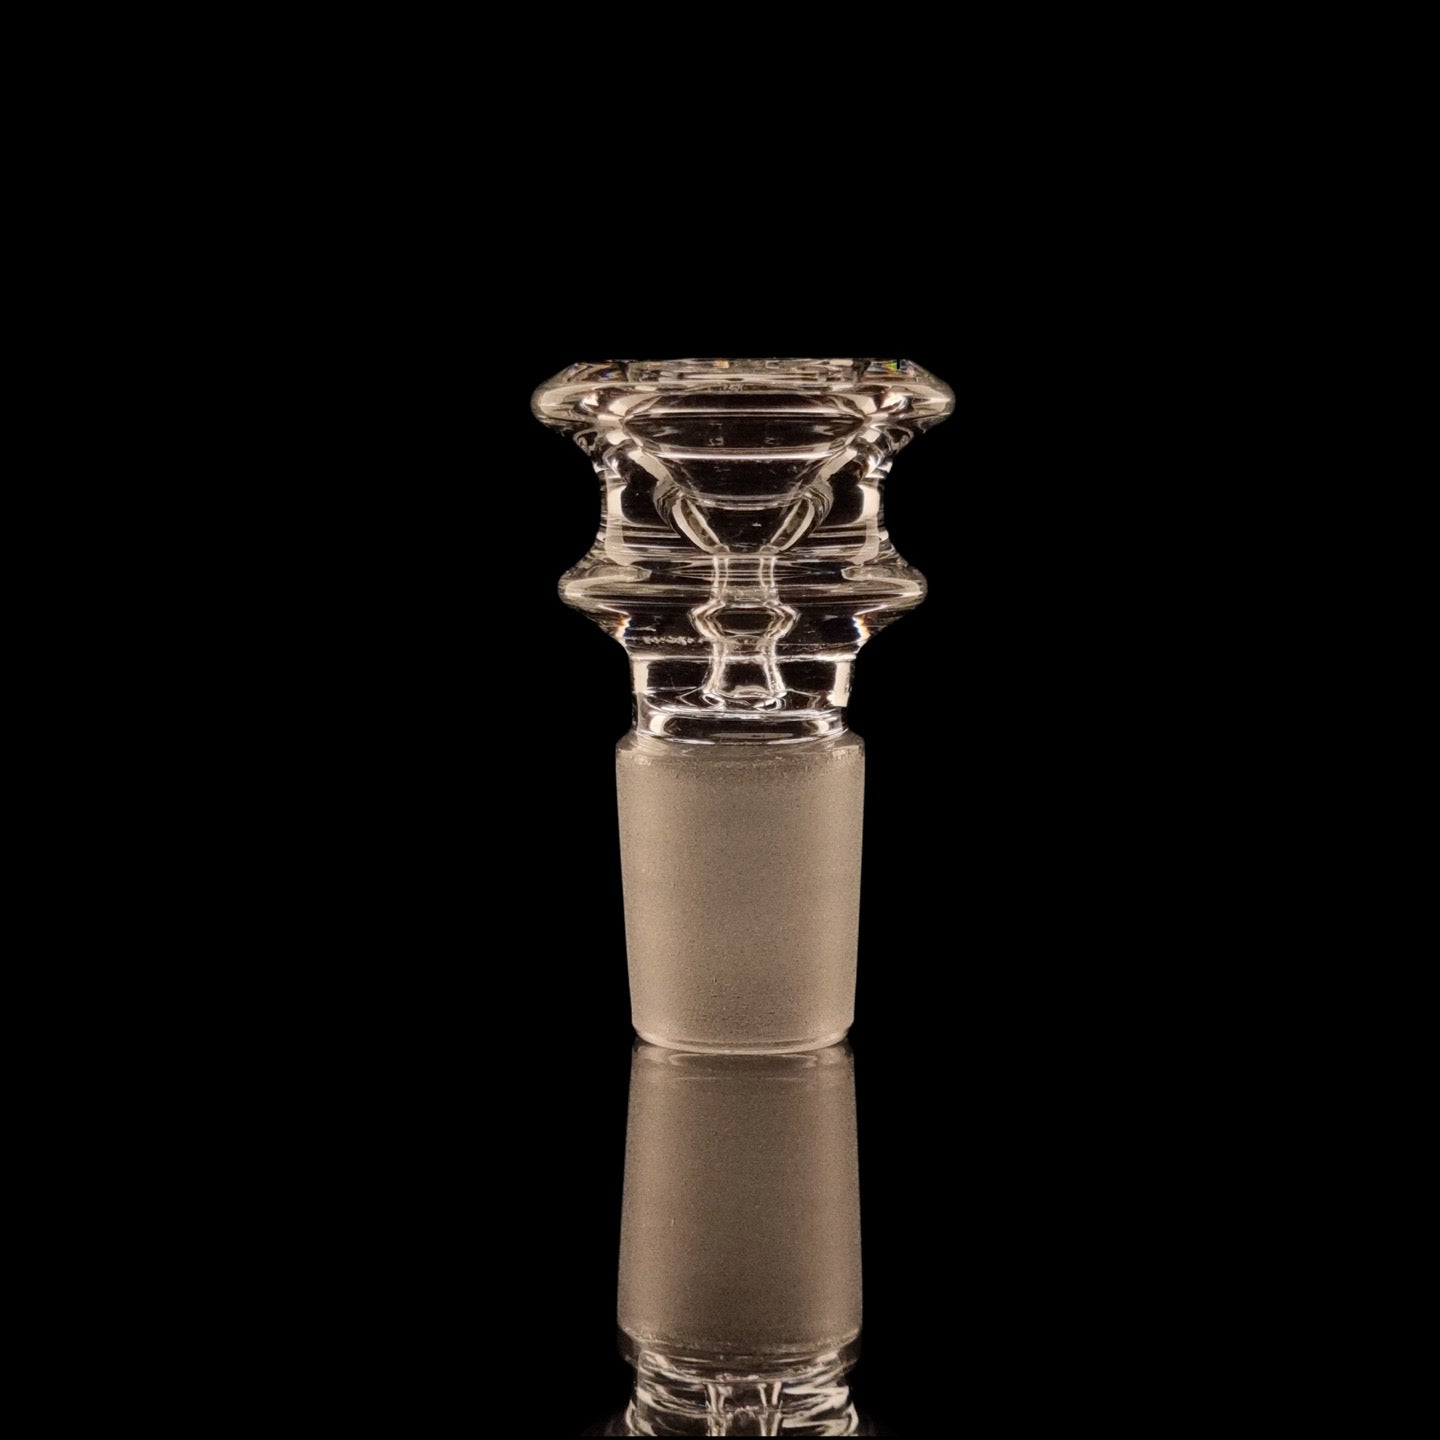 Thick 18mm Male Funnel Bowl